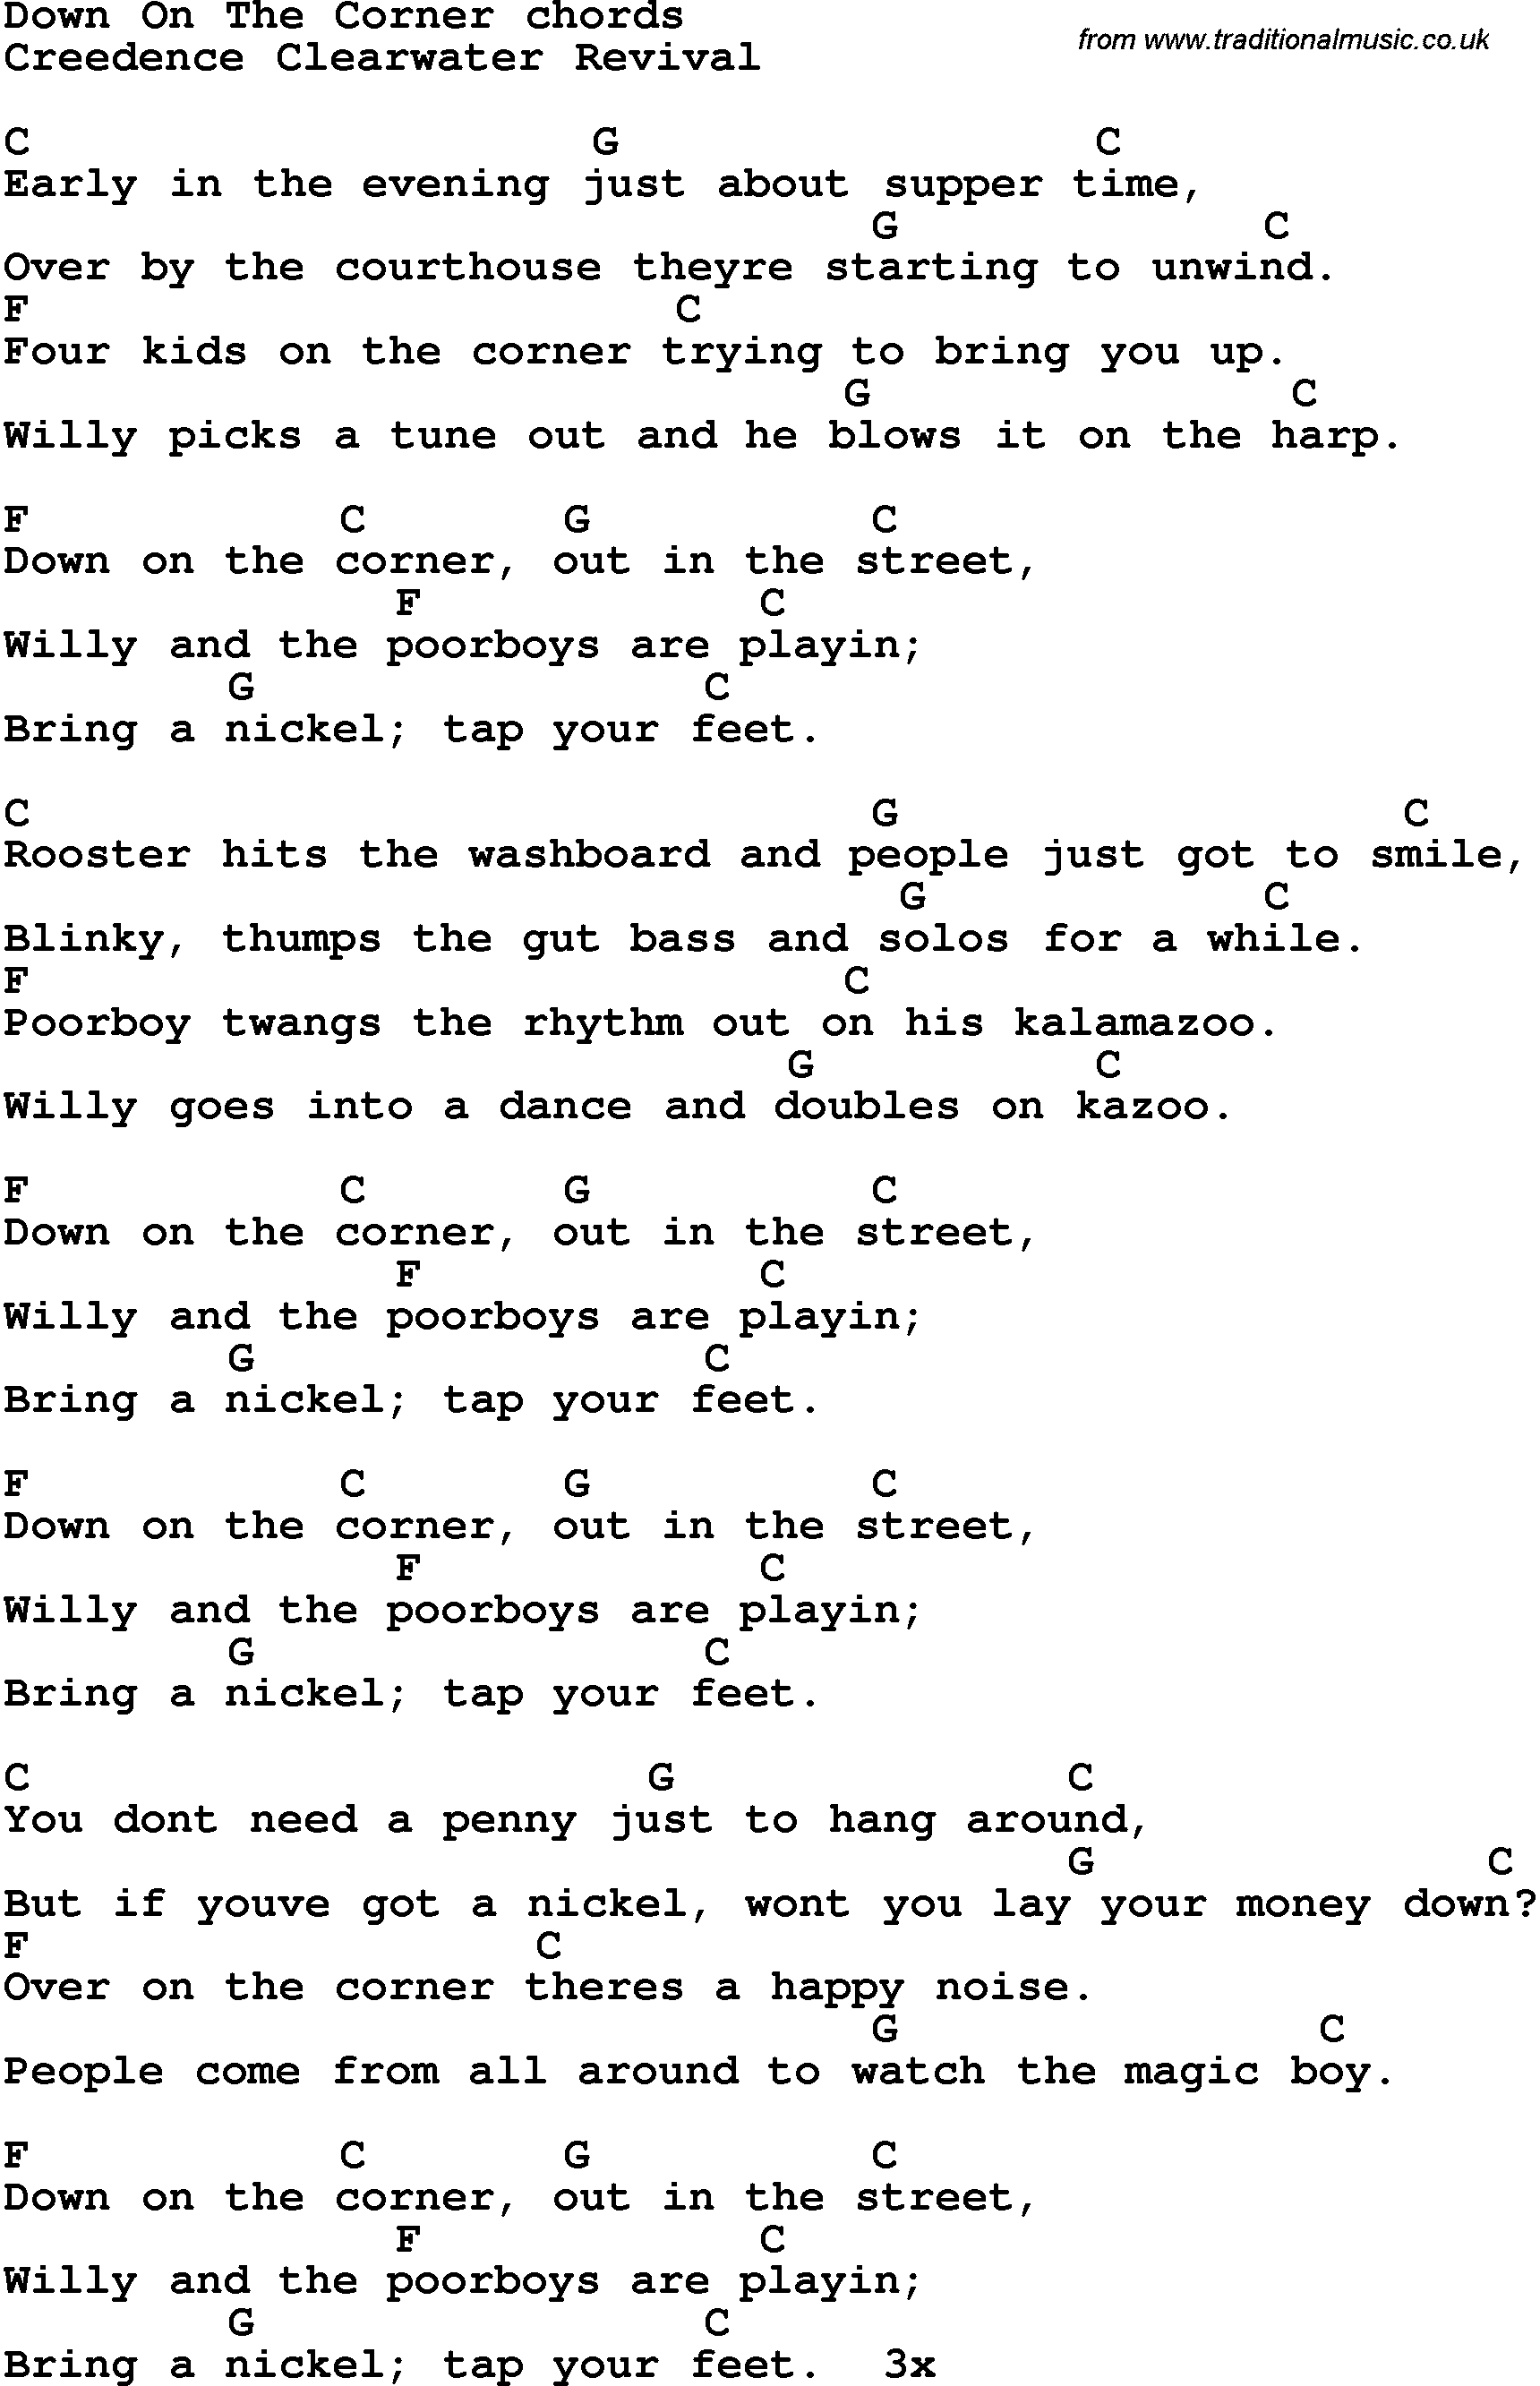 Song Lyrics with guitar chords for Down On The Corner